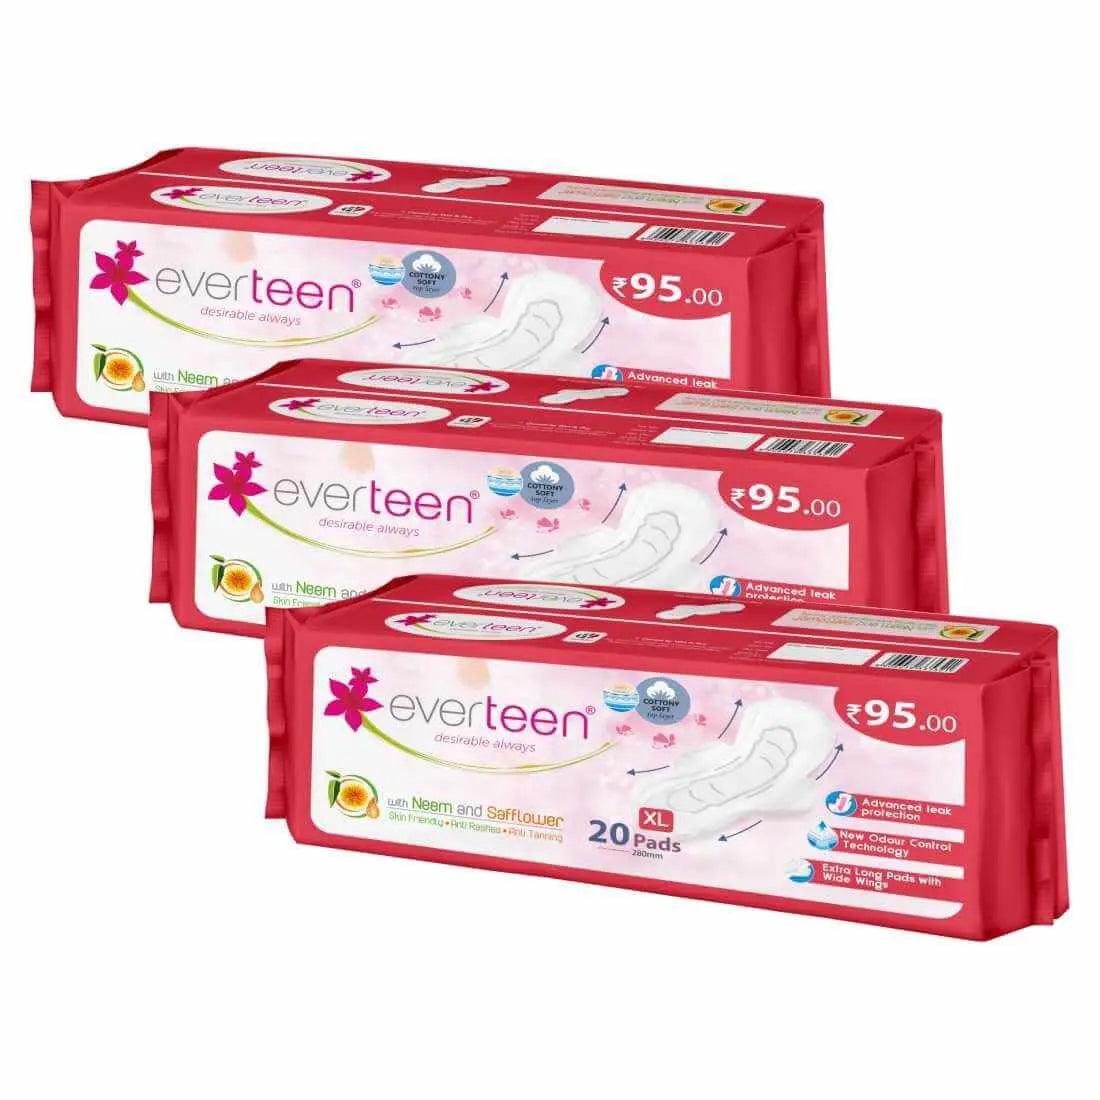 everteen XL Sanitary Napkin Pads with Neem and Safflower for Women - 20 Pads, 280mm 8903540010671